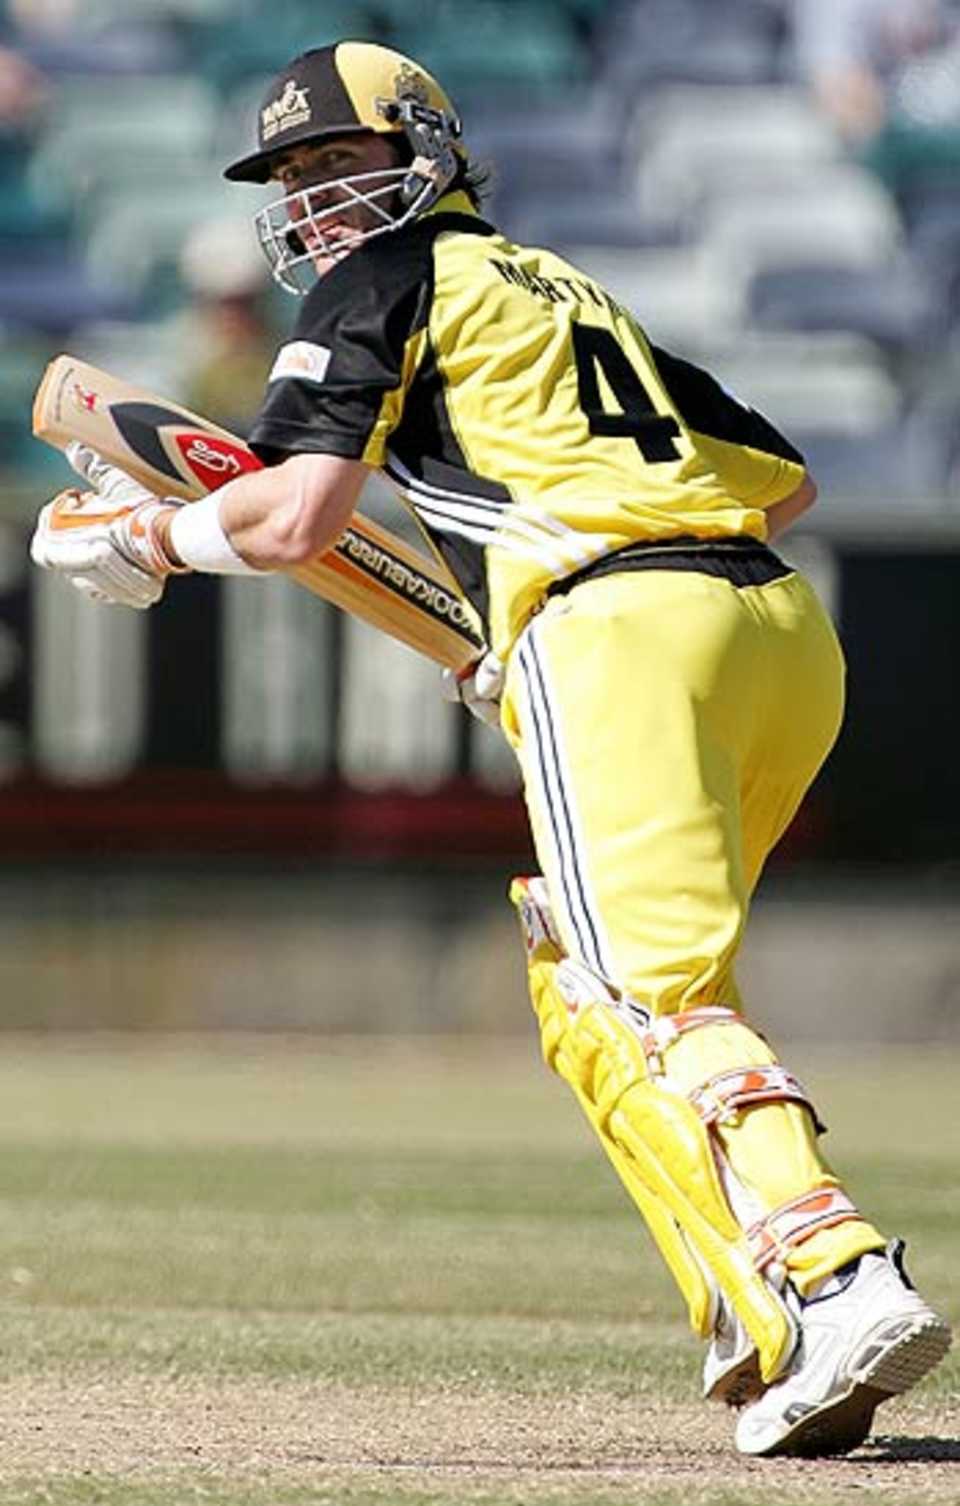 Damien Martyn's 110 took Western Australia to victory, Western Australia v Victoria, ING Cup, Perth, Oct 23, 2005